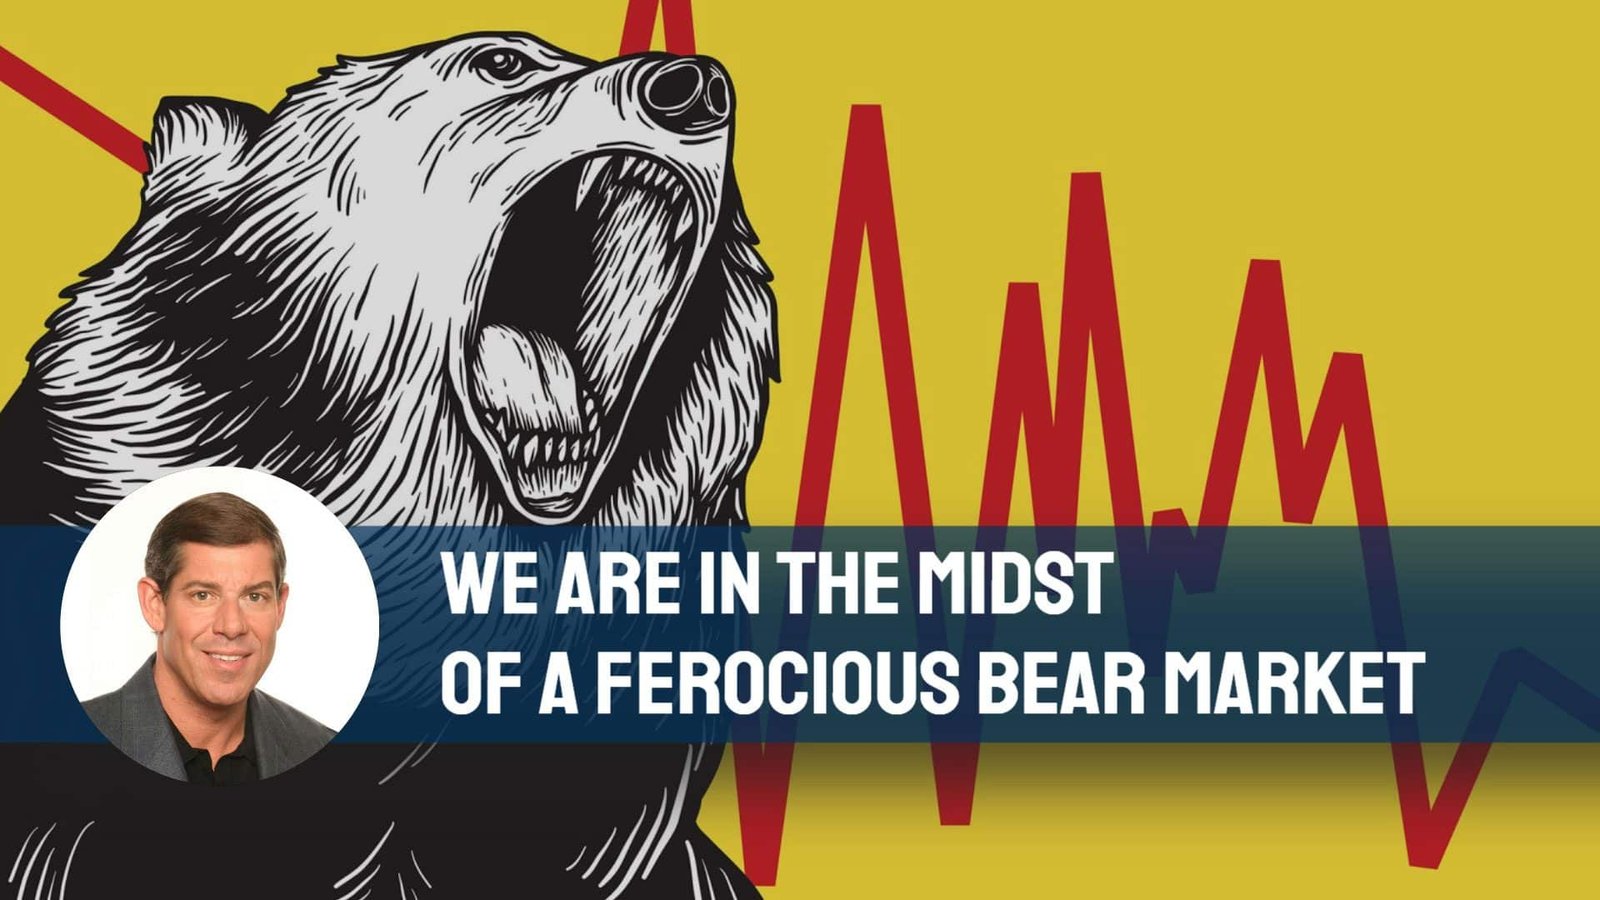 We Are in the Midst of a Ferocious Bear Market